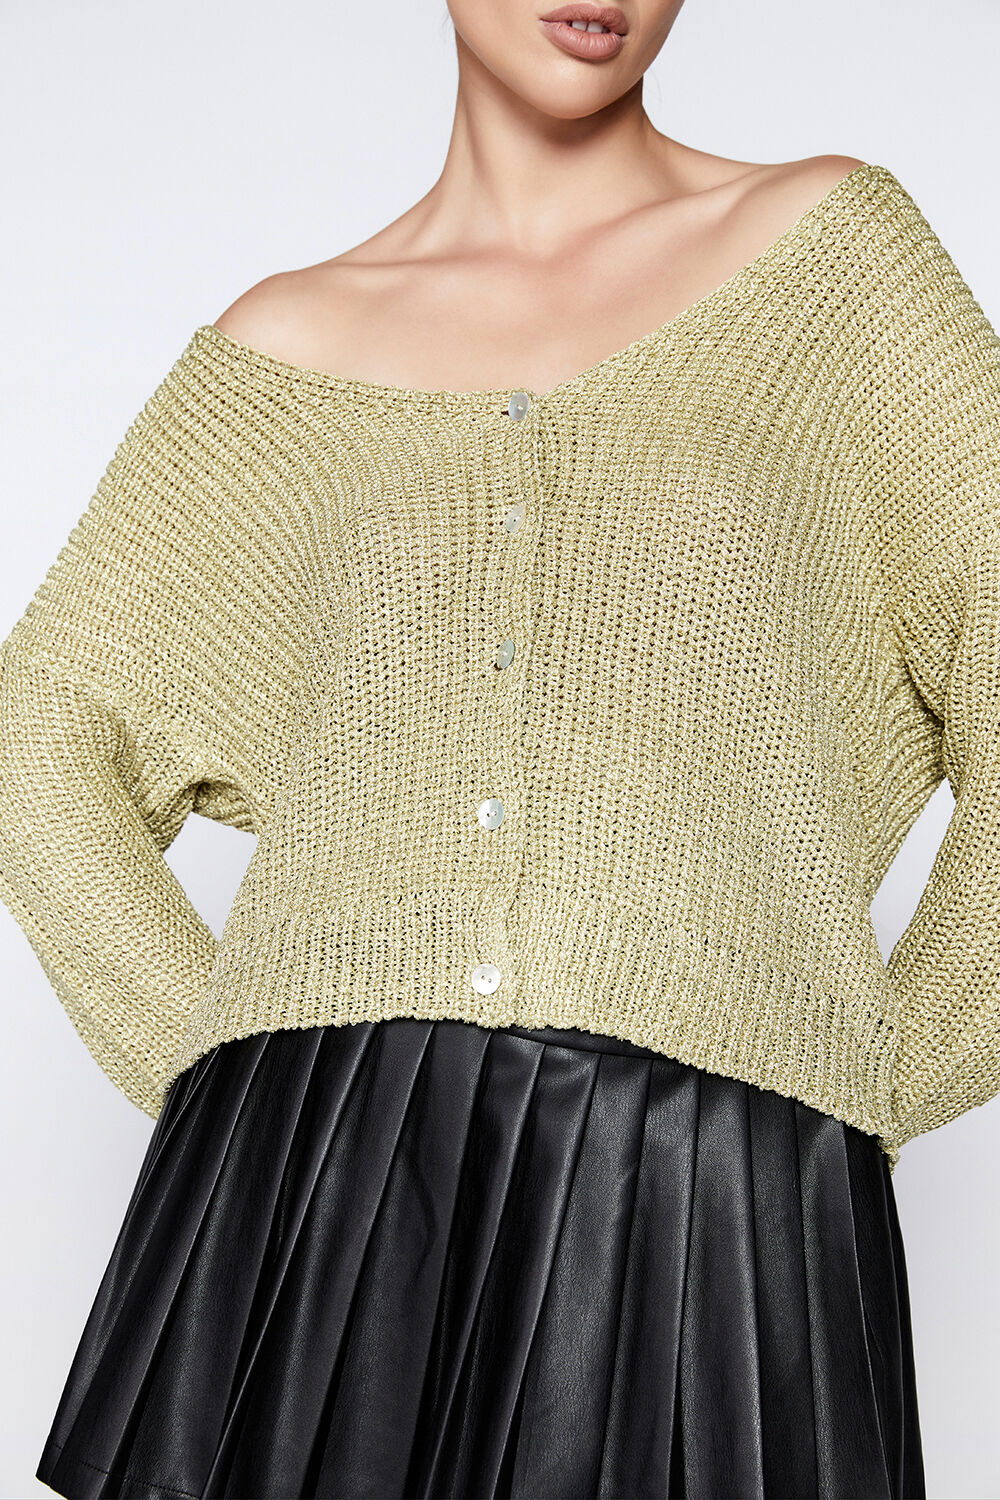 LUREX KNIT CARDI in colour GOLD EARTH